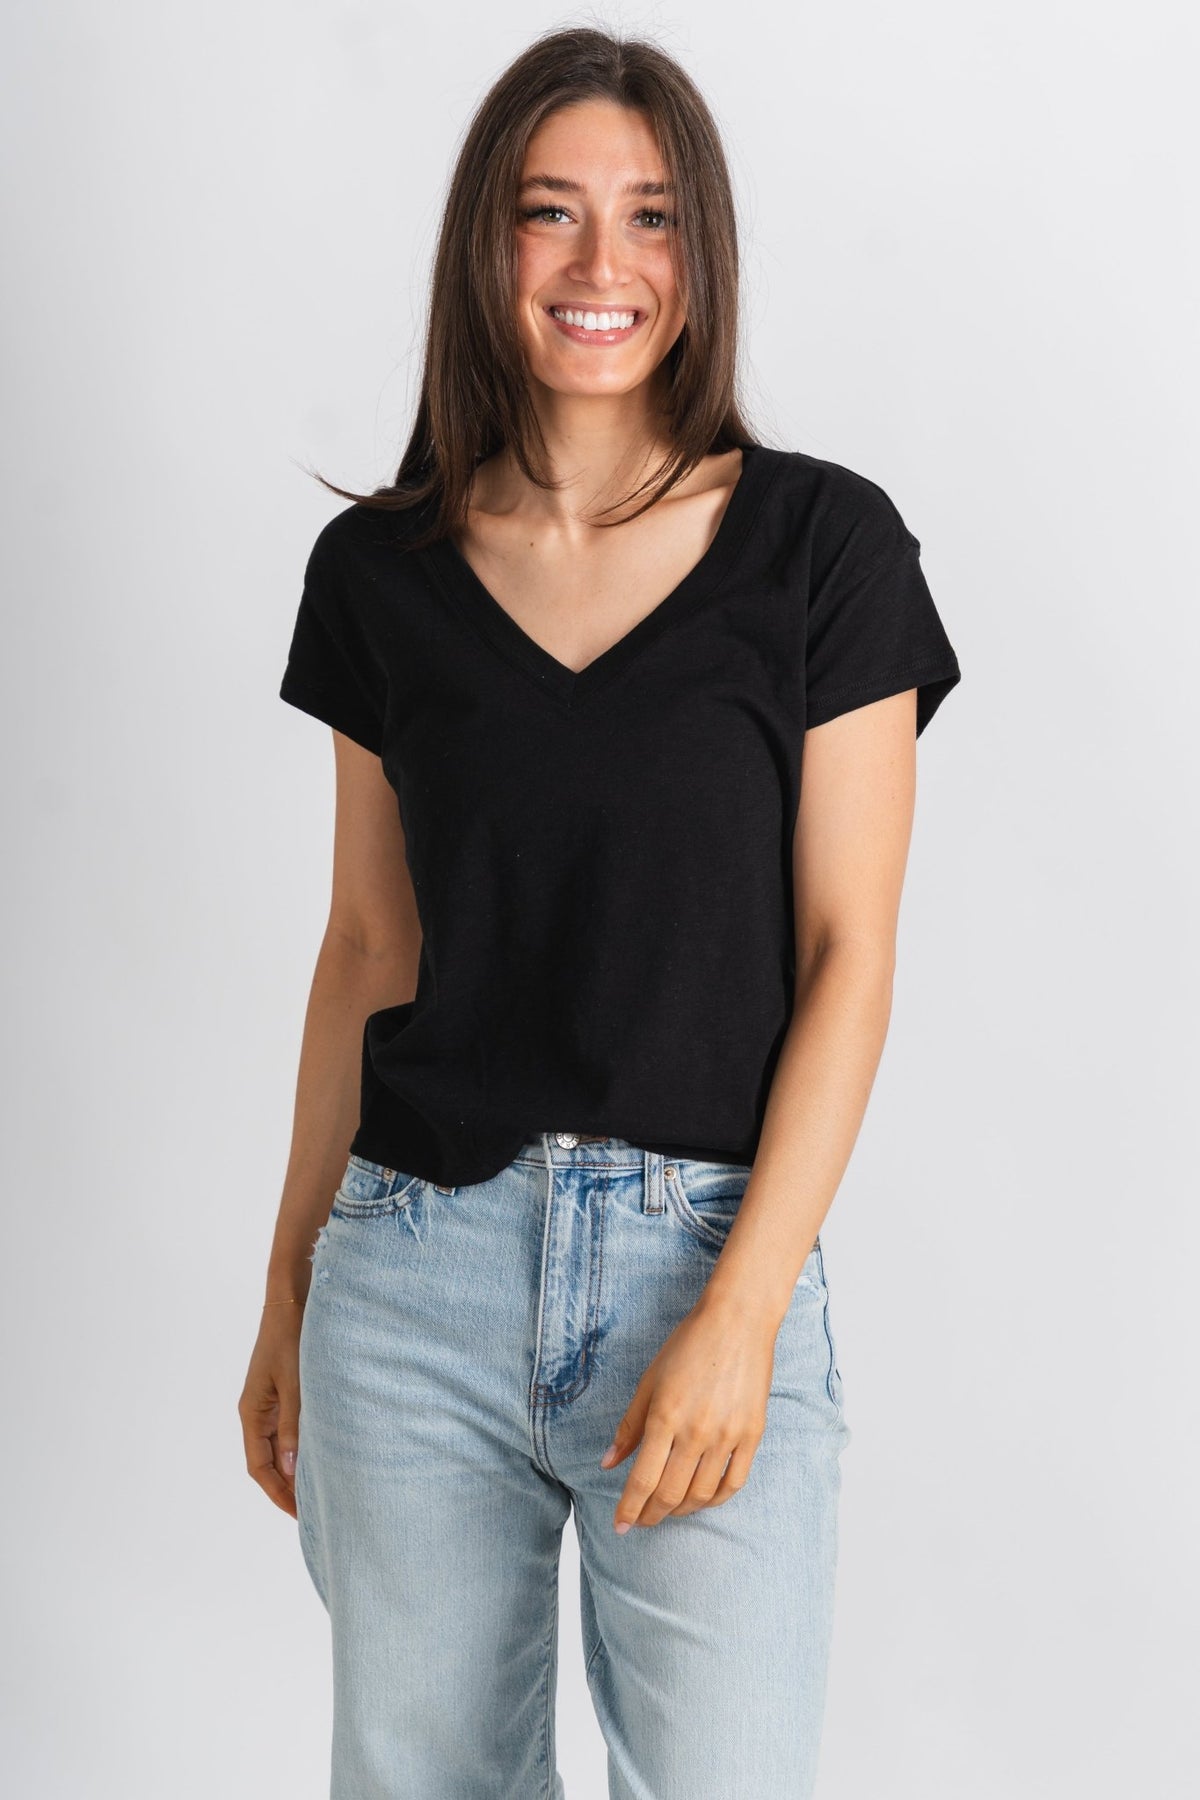 Z Supply modern v-neck tee black - Z Supply T-shirts - Z Supply Tops, Dresses, Tanks, Tees, Cardigans, Joggers and Loungewear at Lush Fashion Lounge